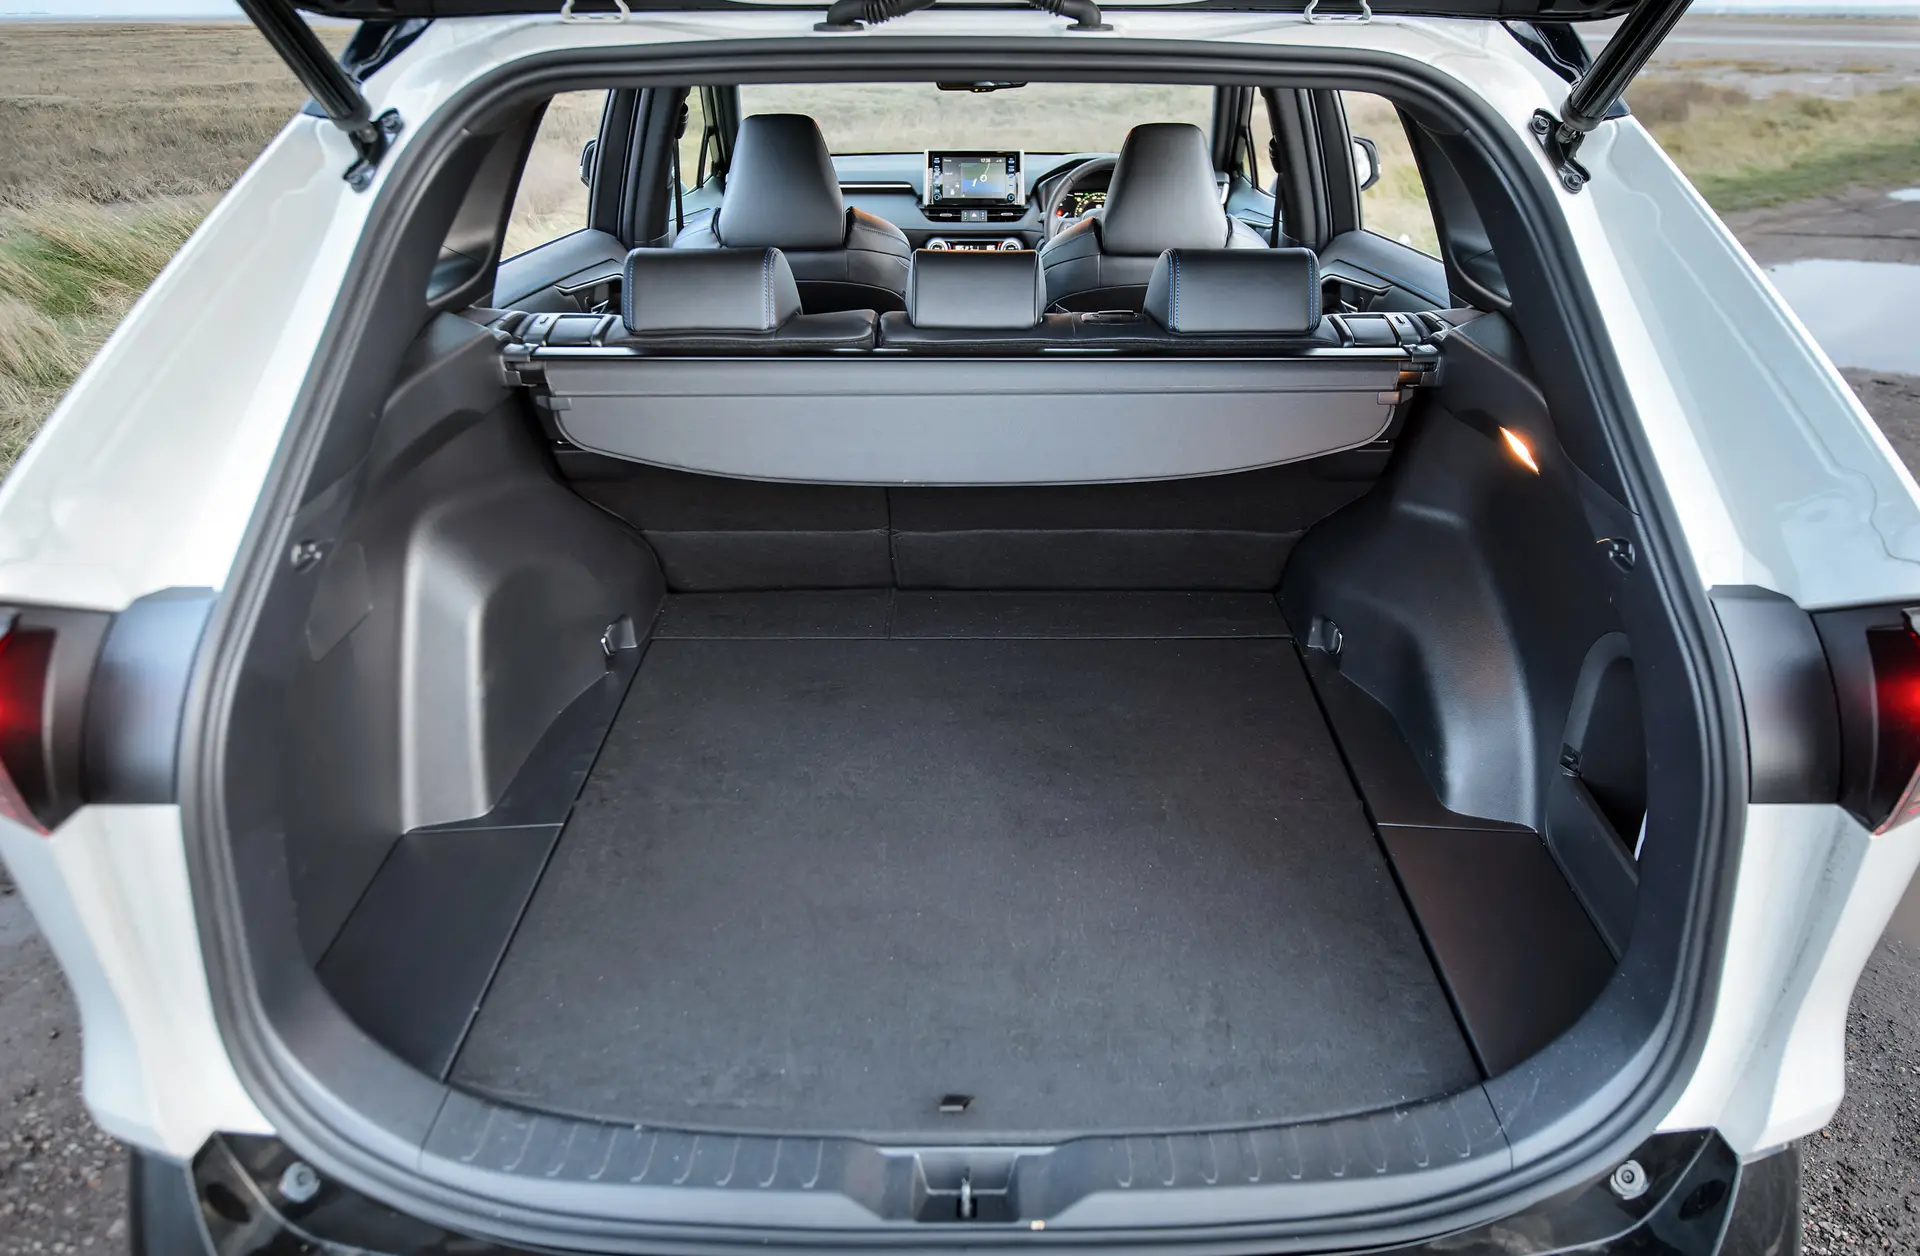 Toyota RAV4 Review 2023: boot space